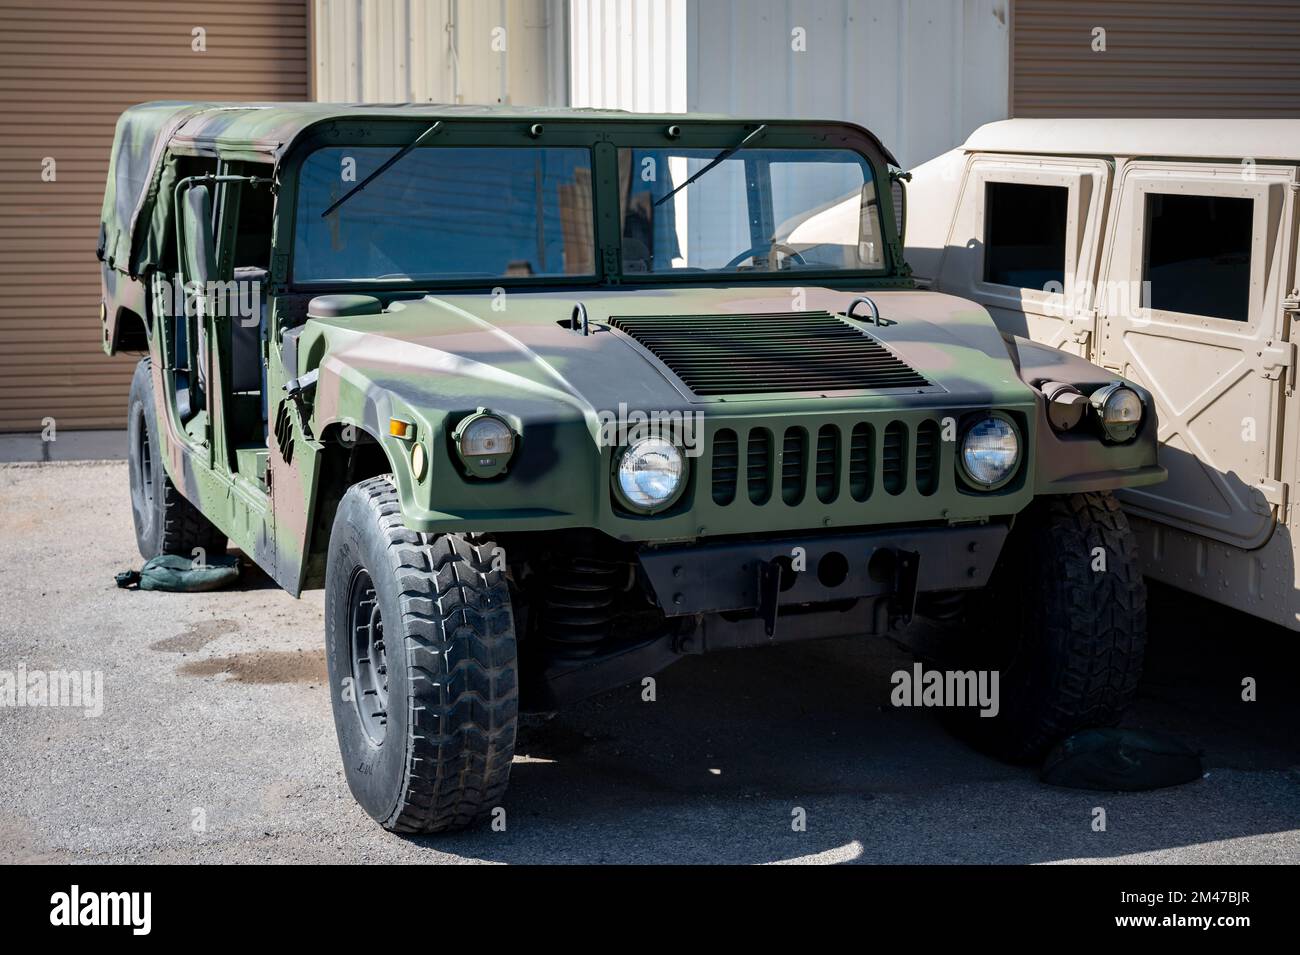 Front detail of a Humvee off-road military light vehicle Stock Photo